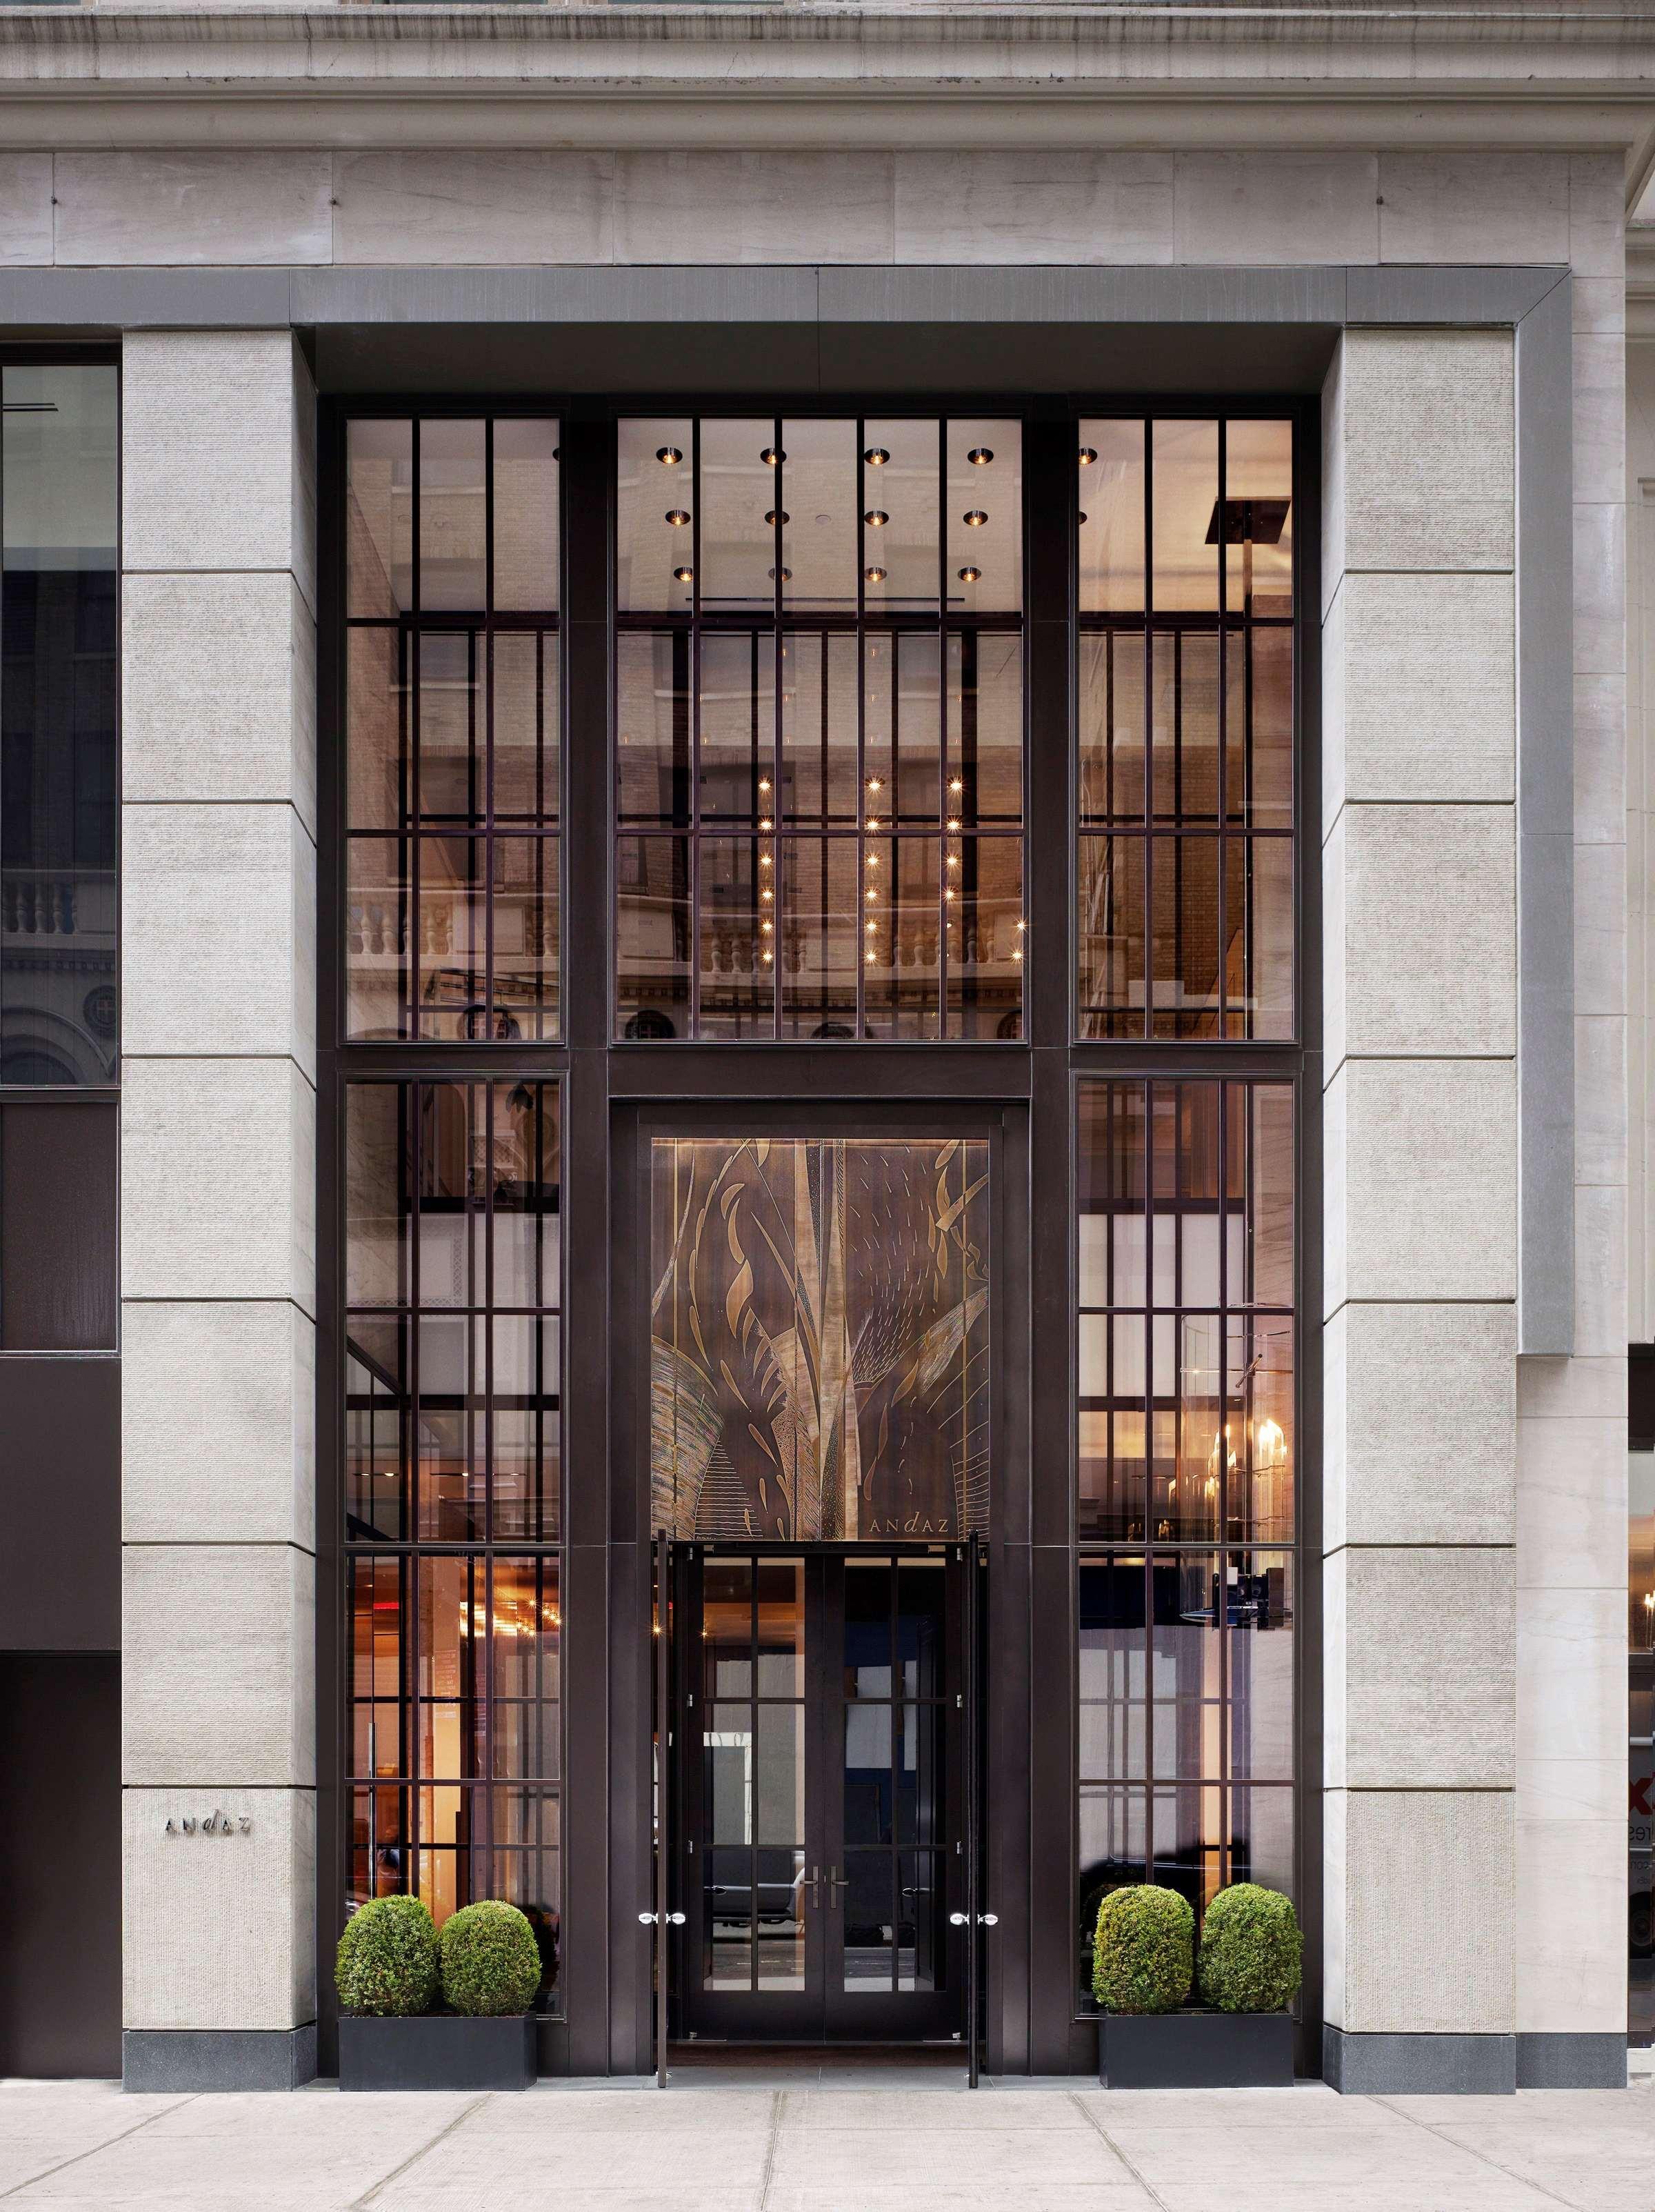 Andaz 5Th Avenue-A Concept By Hyatt Hotel New York Exterior foto